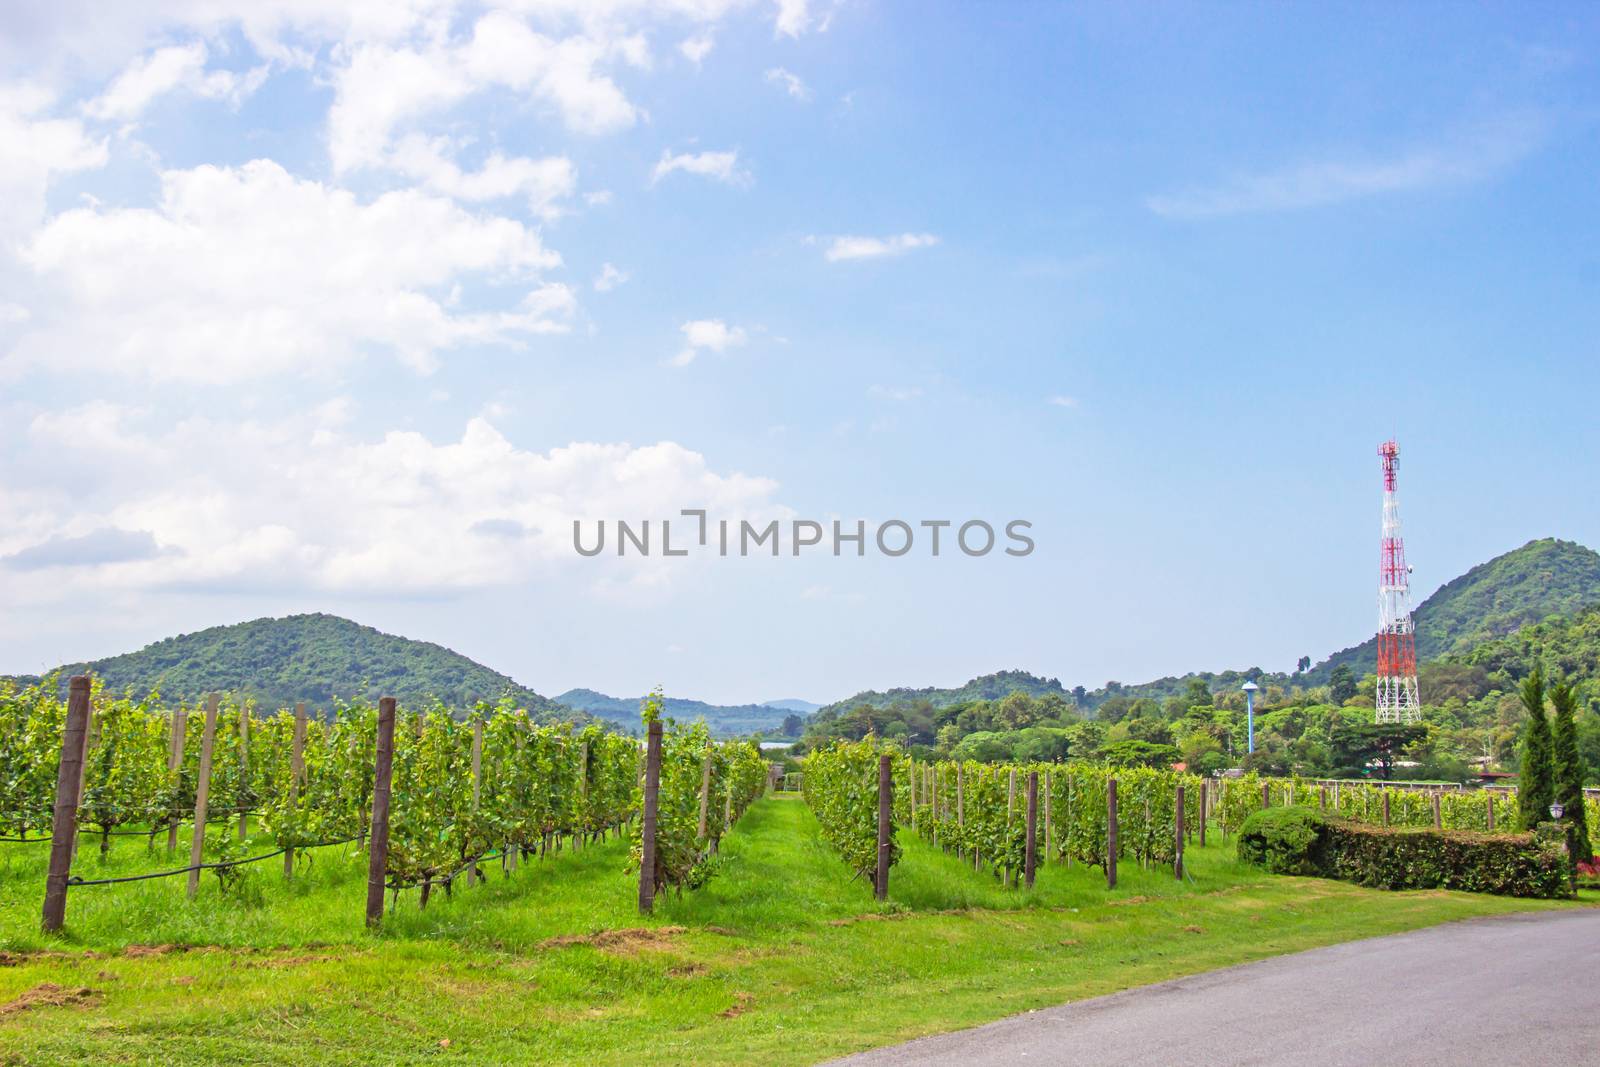 Grape farm and garden at near lake and mountain in day a bright sky and is popular tourist destination of Pattaya, Chonburi prefecture.